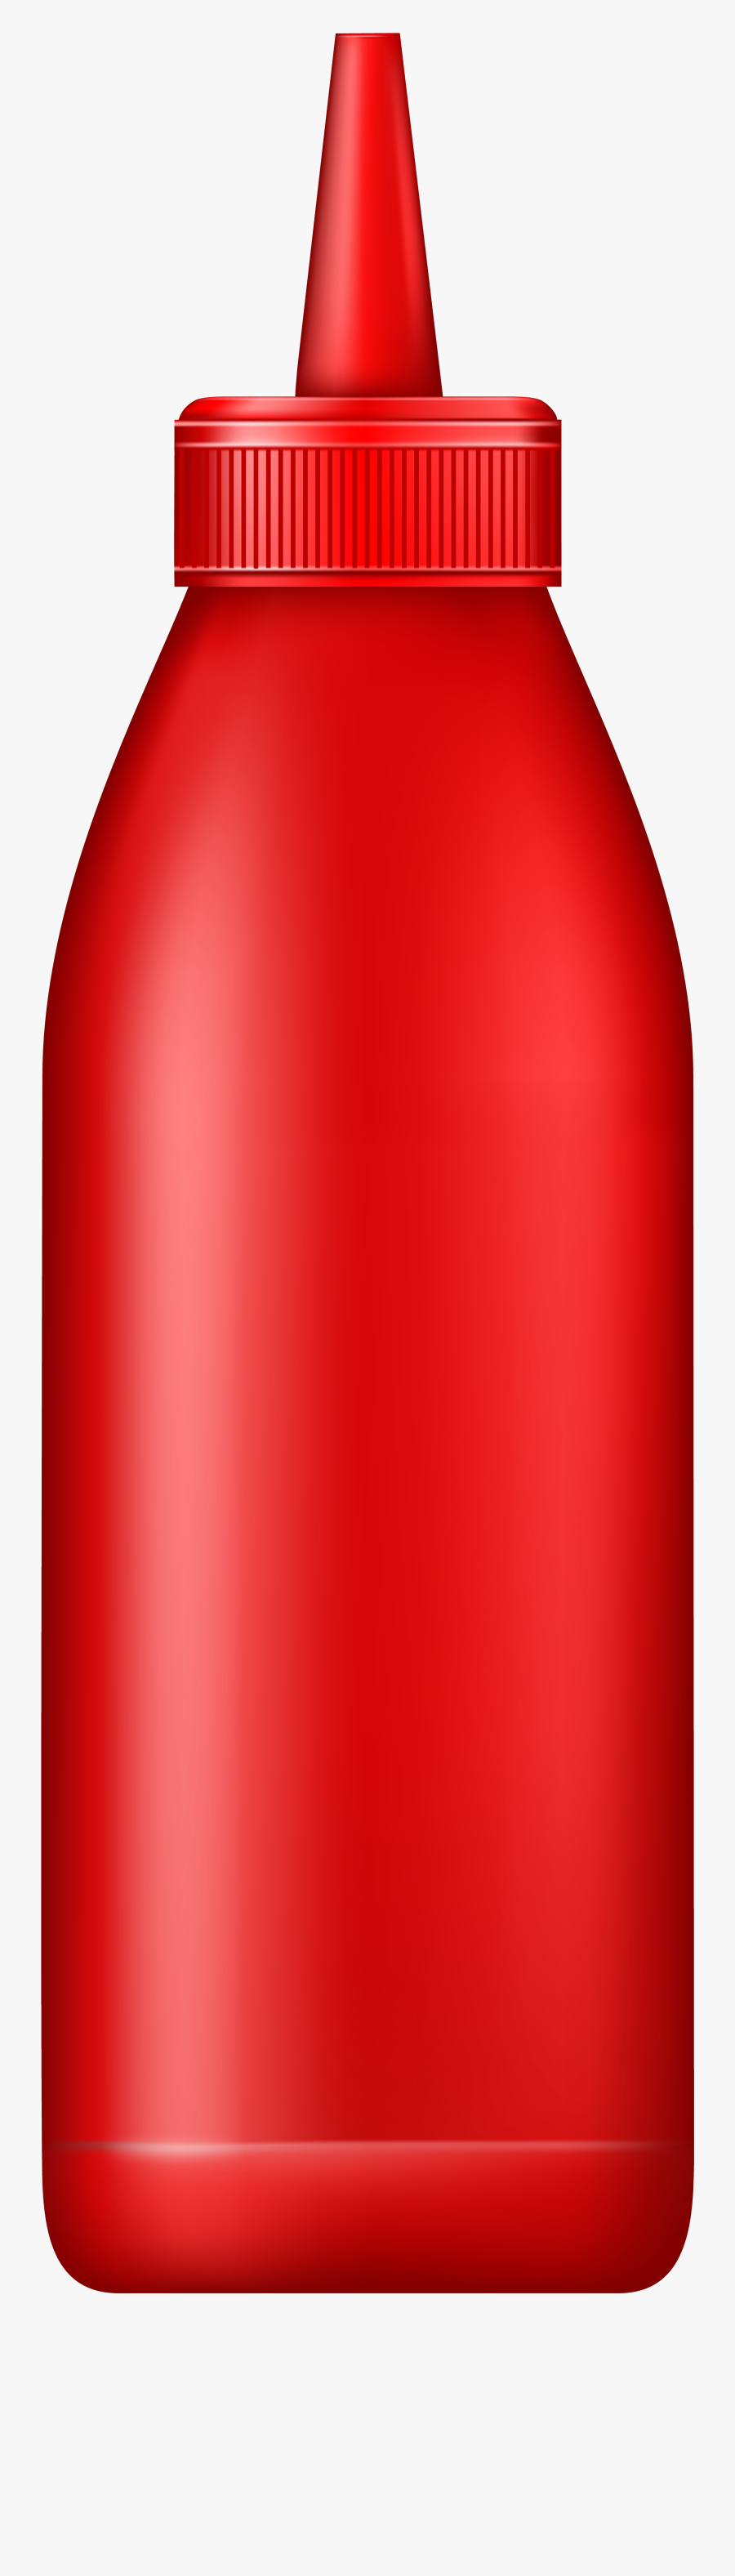 Kids Clipart Water Bottle , Free Transparent Clipart - ClipartKey